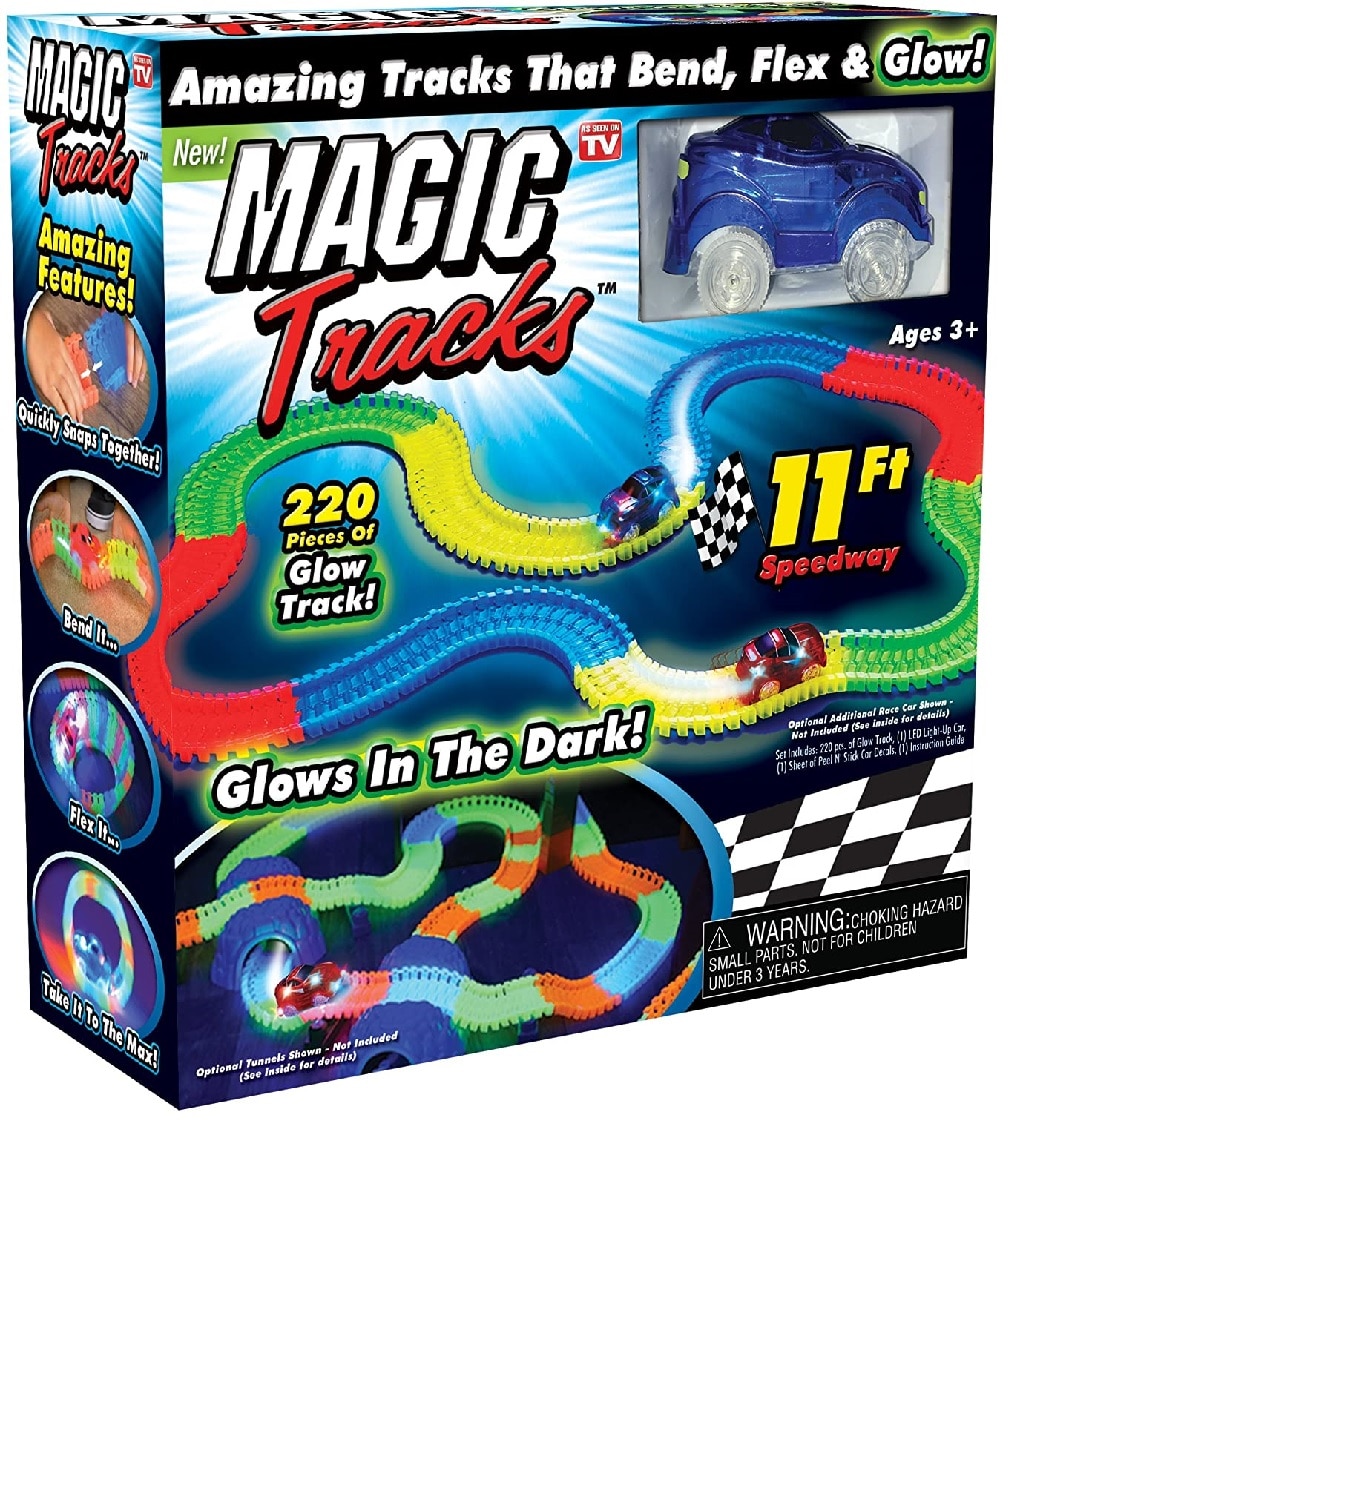 Magic Tracks Kids Toy Christmas Gift Original Packaging SPECIAL DISCOUNT PRICE 